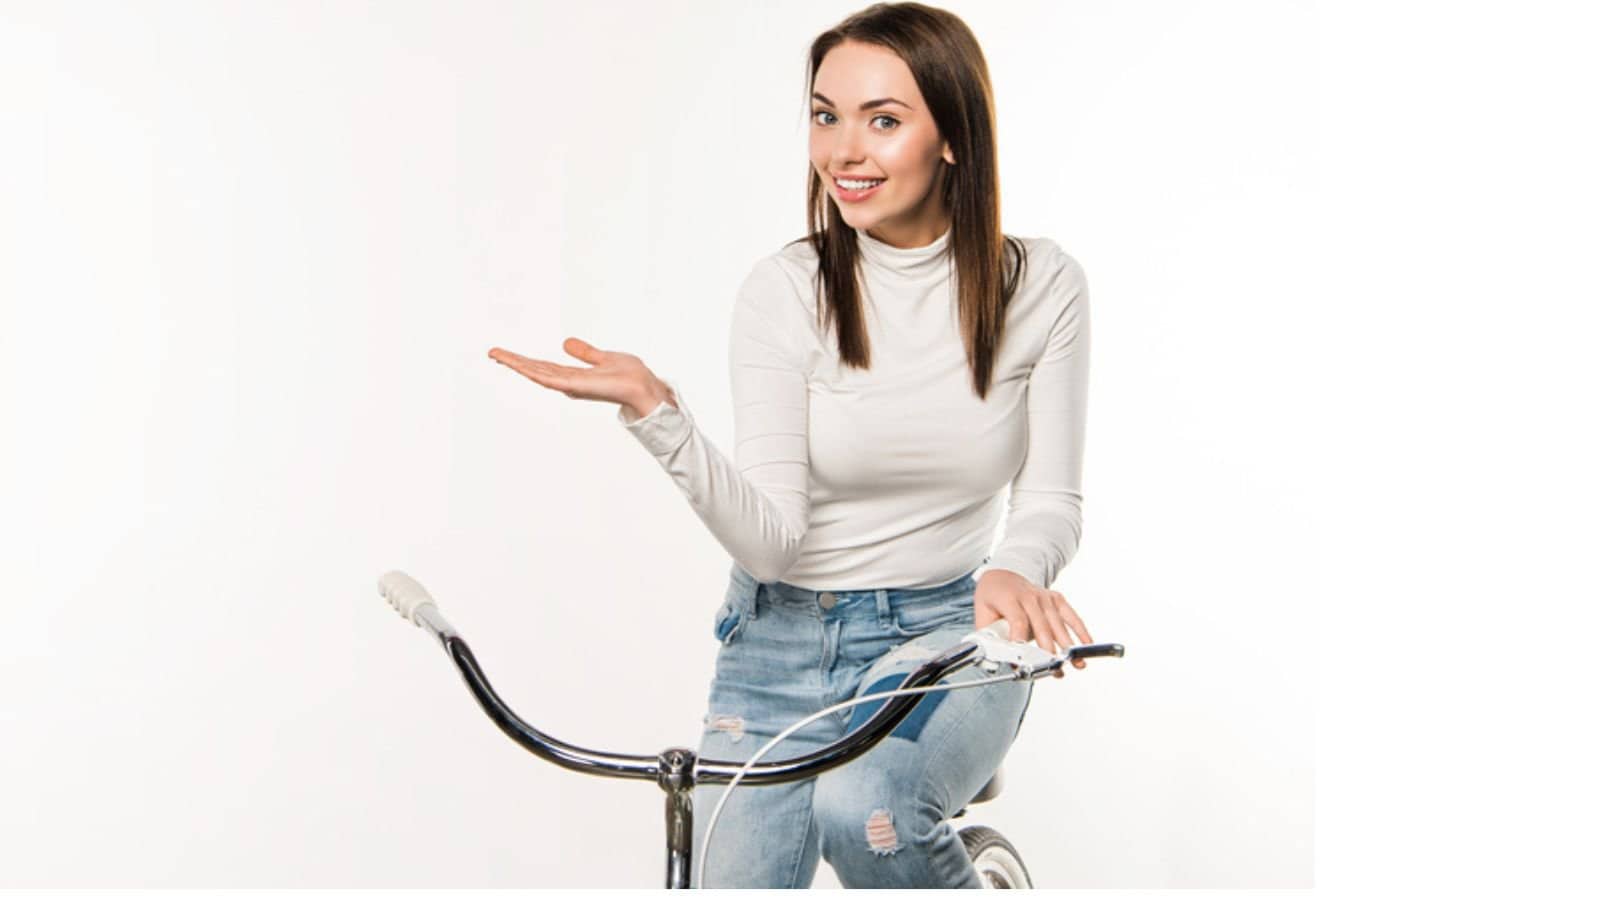 Woman sitting on bicycle